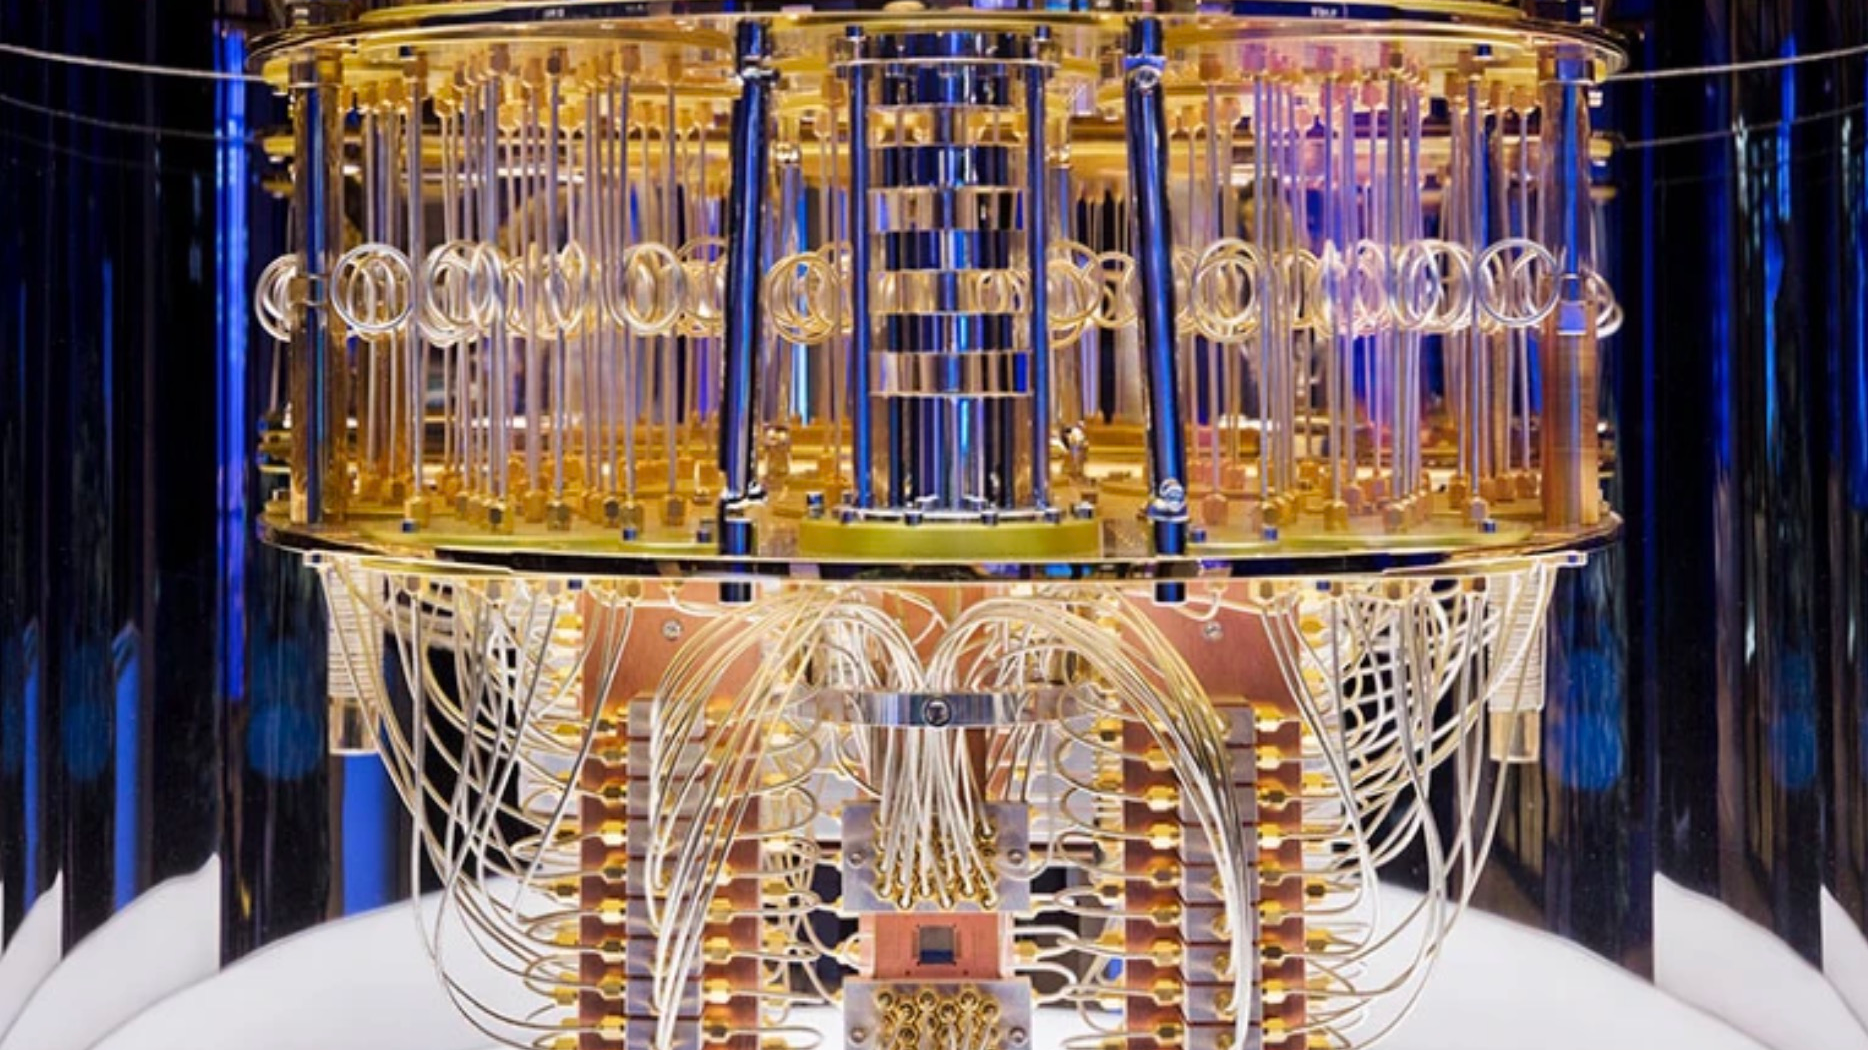 The innards of an IBM quantum computer show the tangle of cables used to control and read out its qubits. /IBM